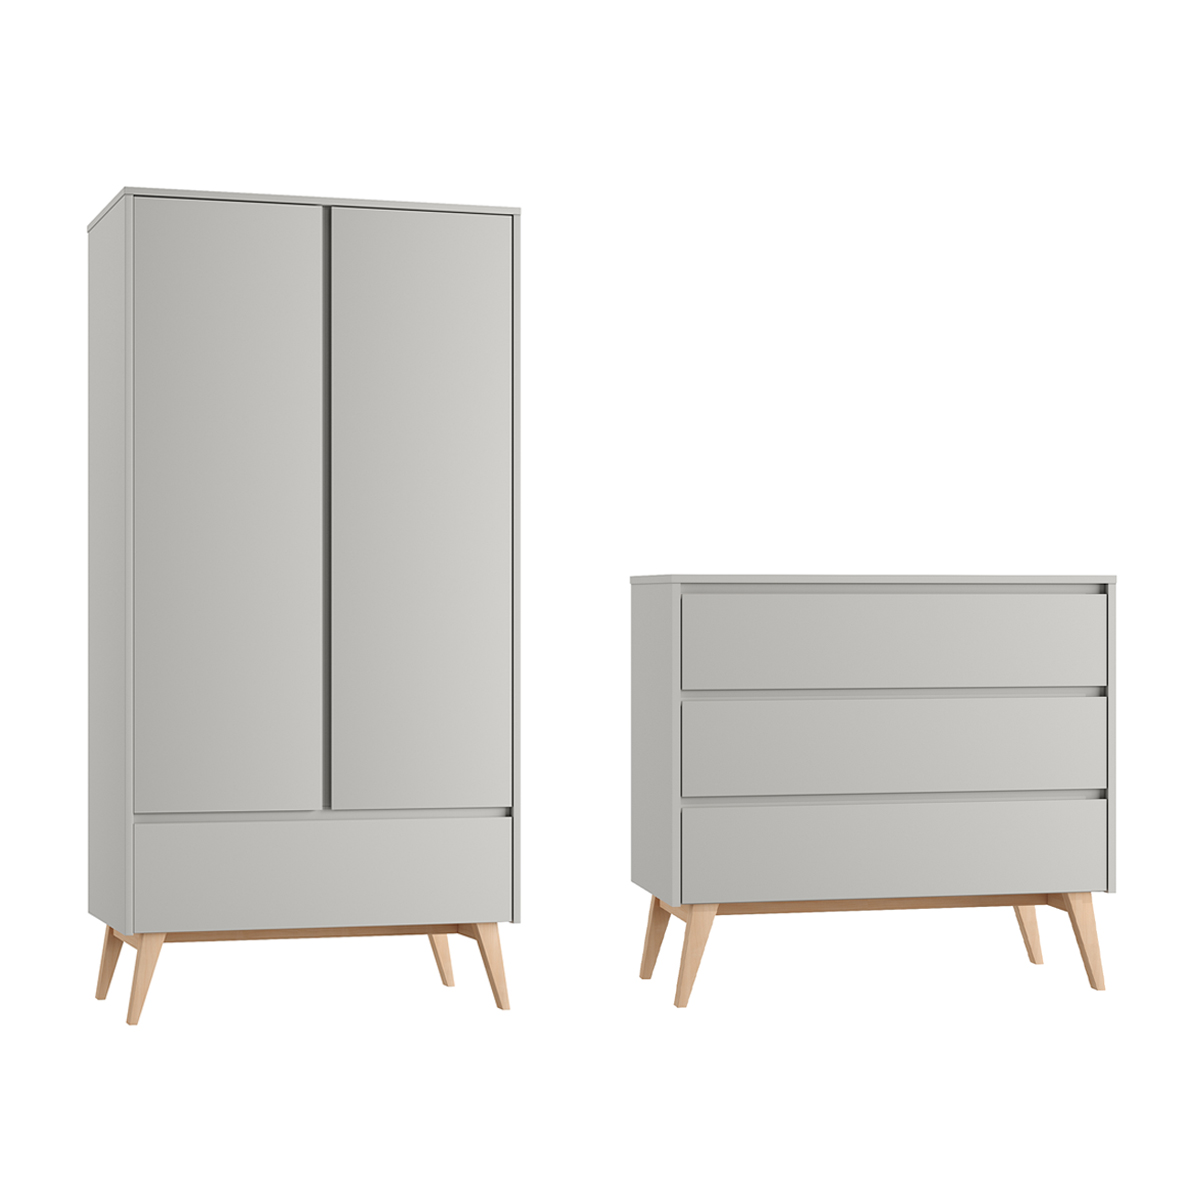 Pinio_Swing_gris_pack_commode_3tiorirs_armoire_2portes